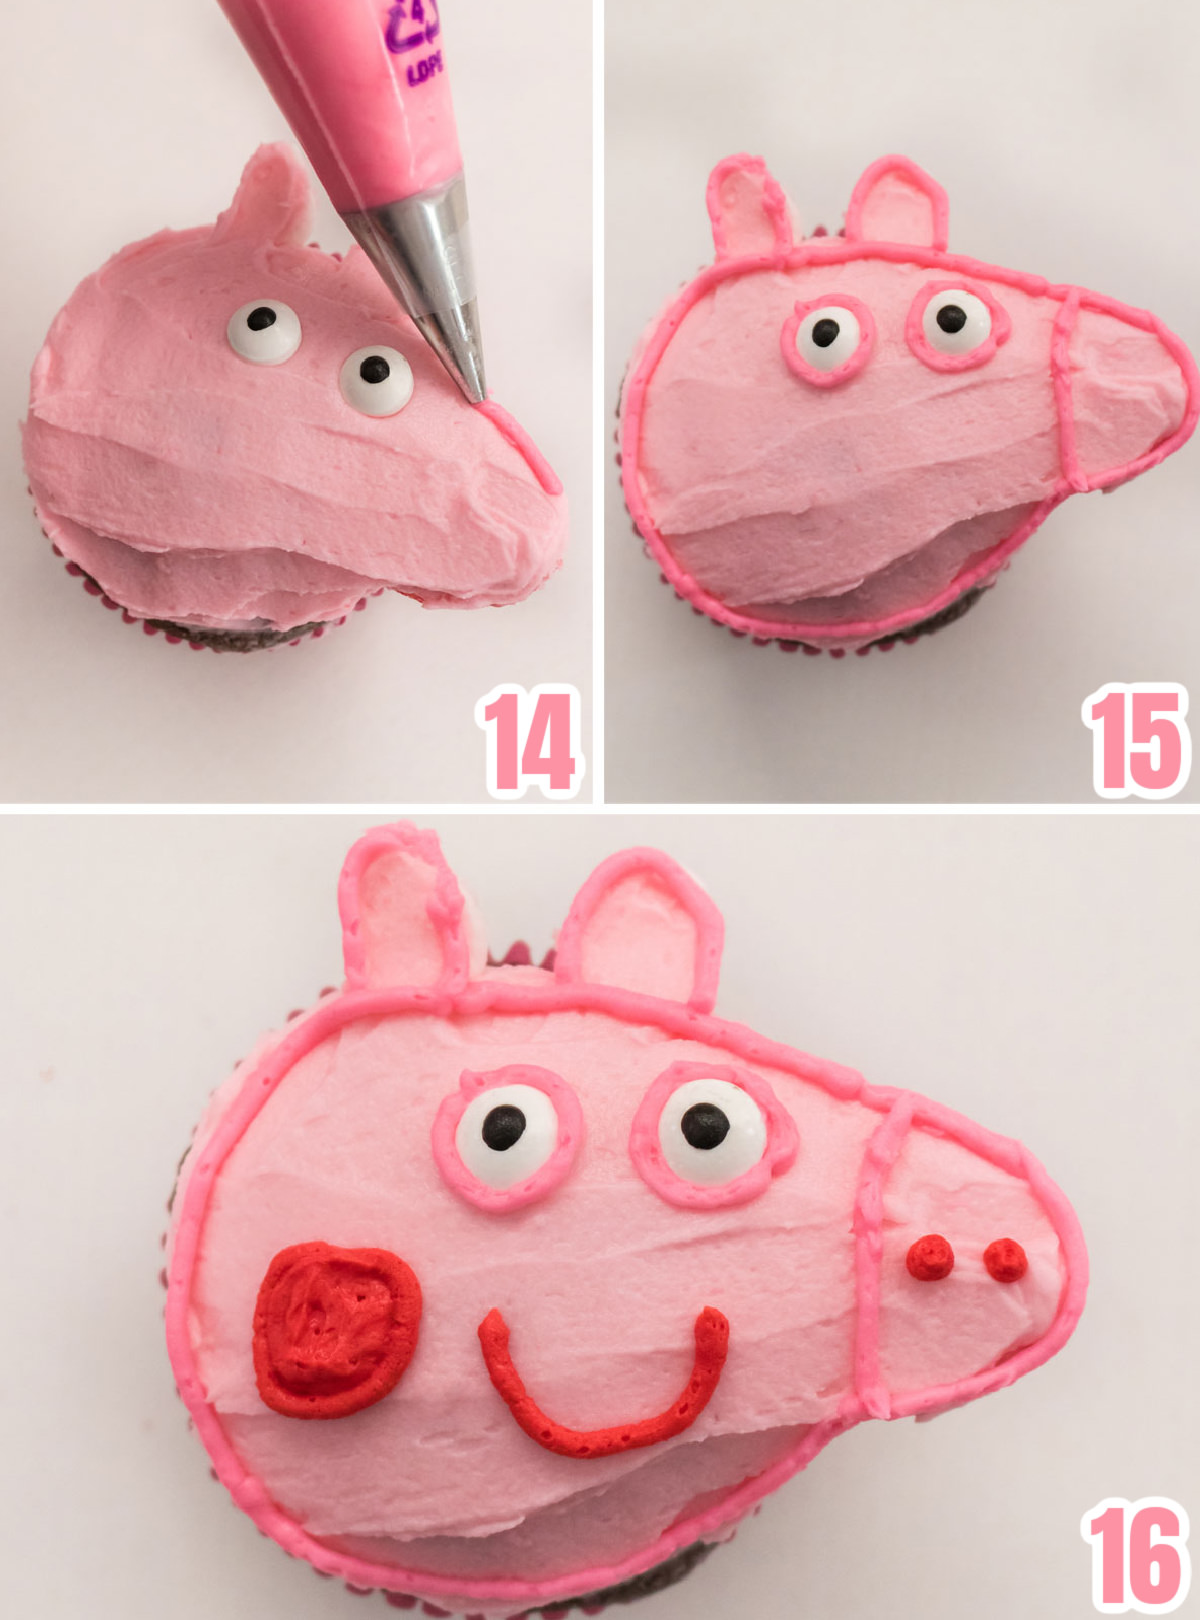 Collage image showing how to decorate the Peppa Pig face on these peppa pig cupcakes.